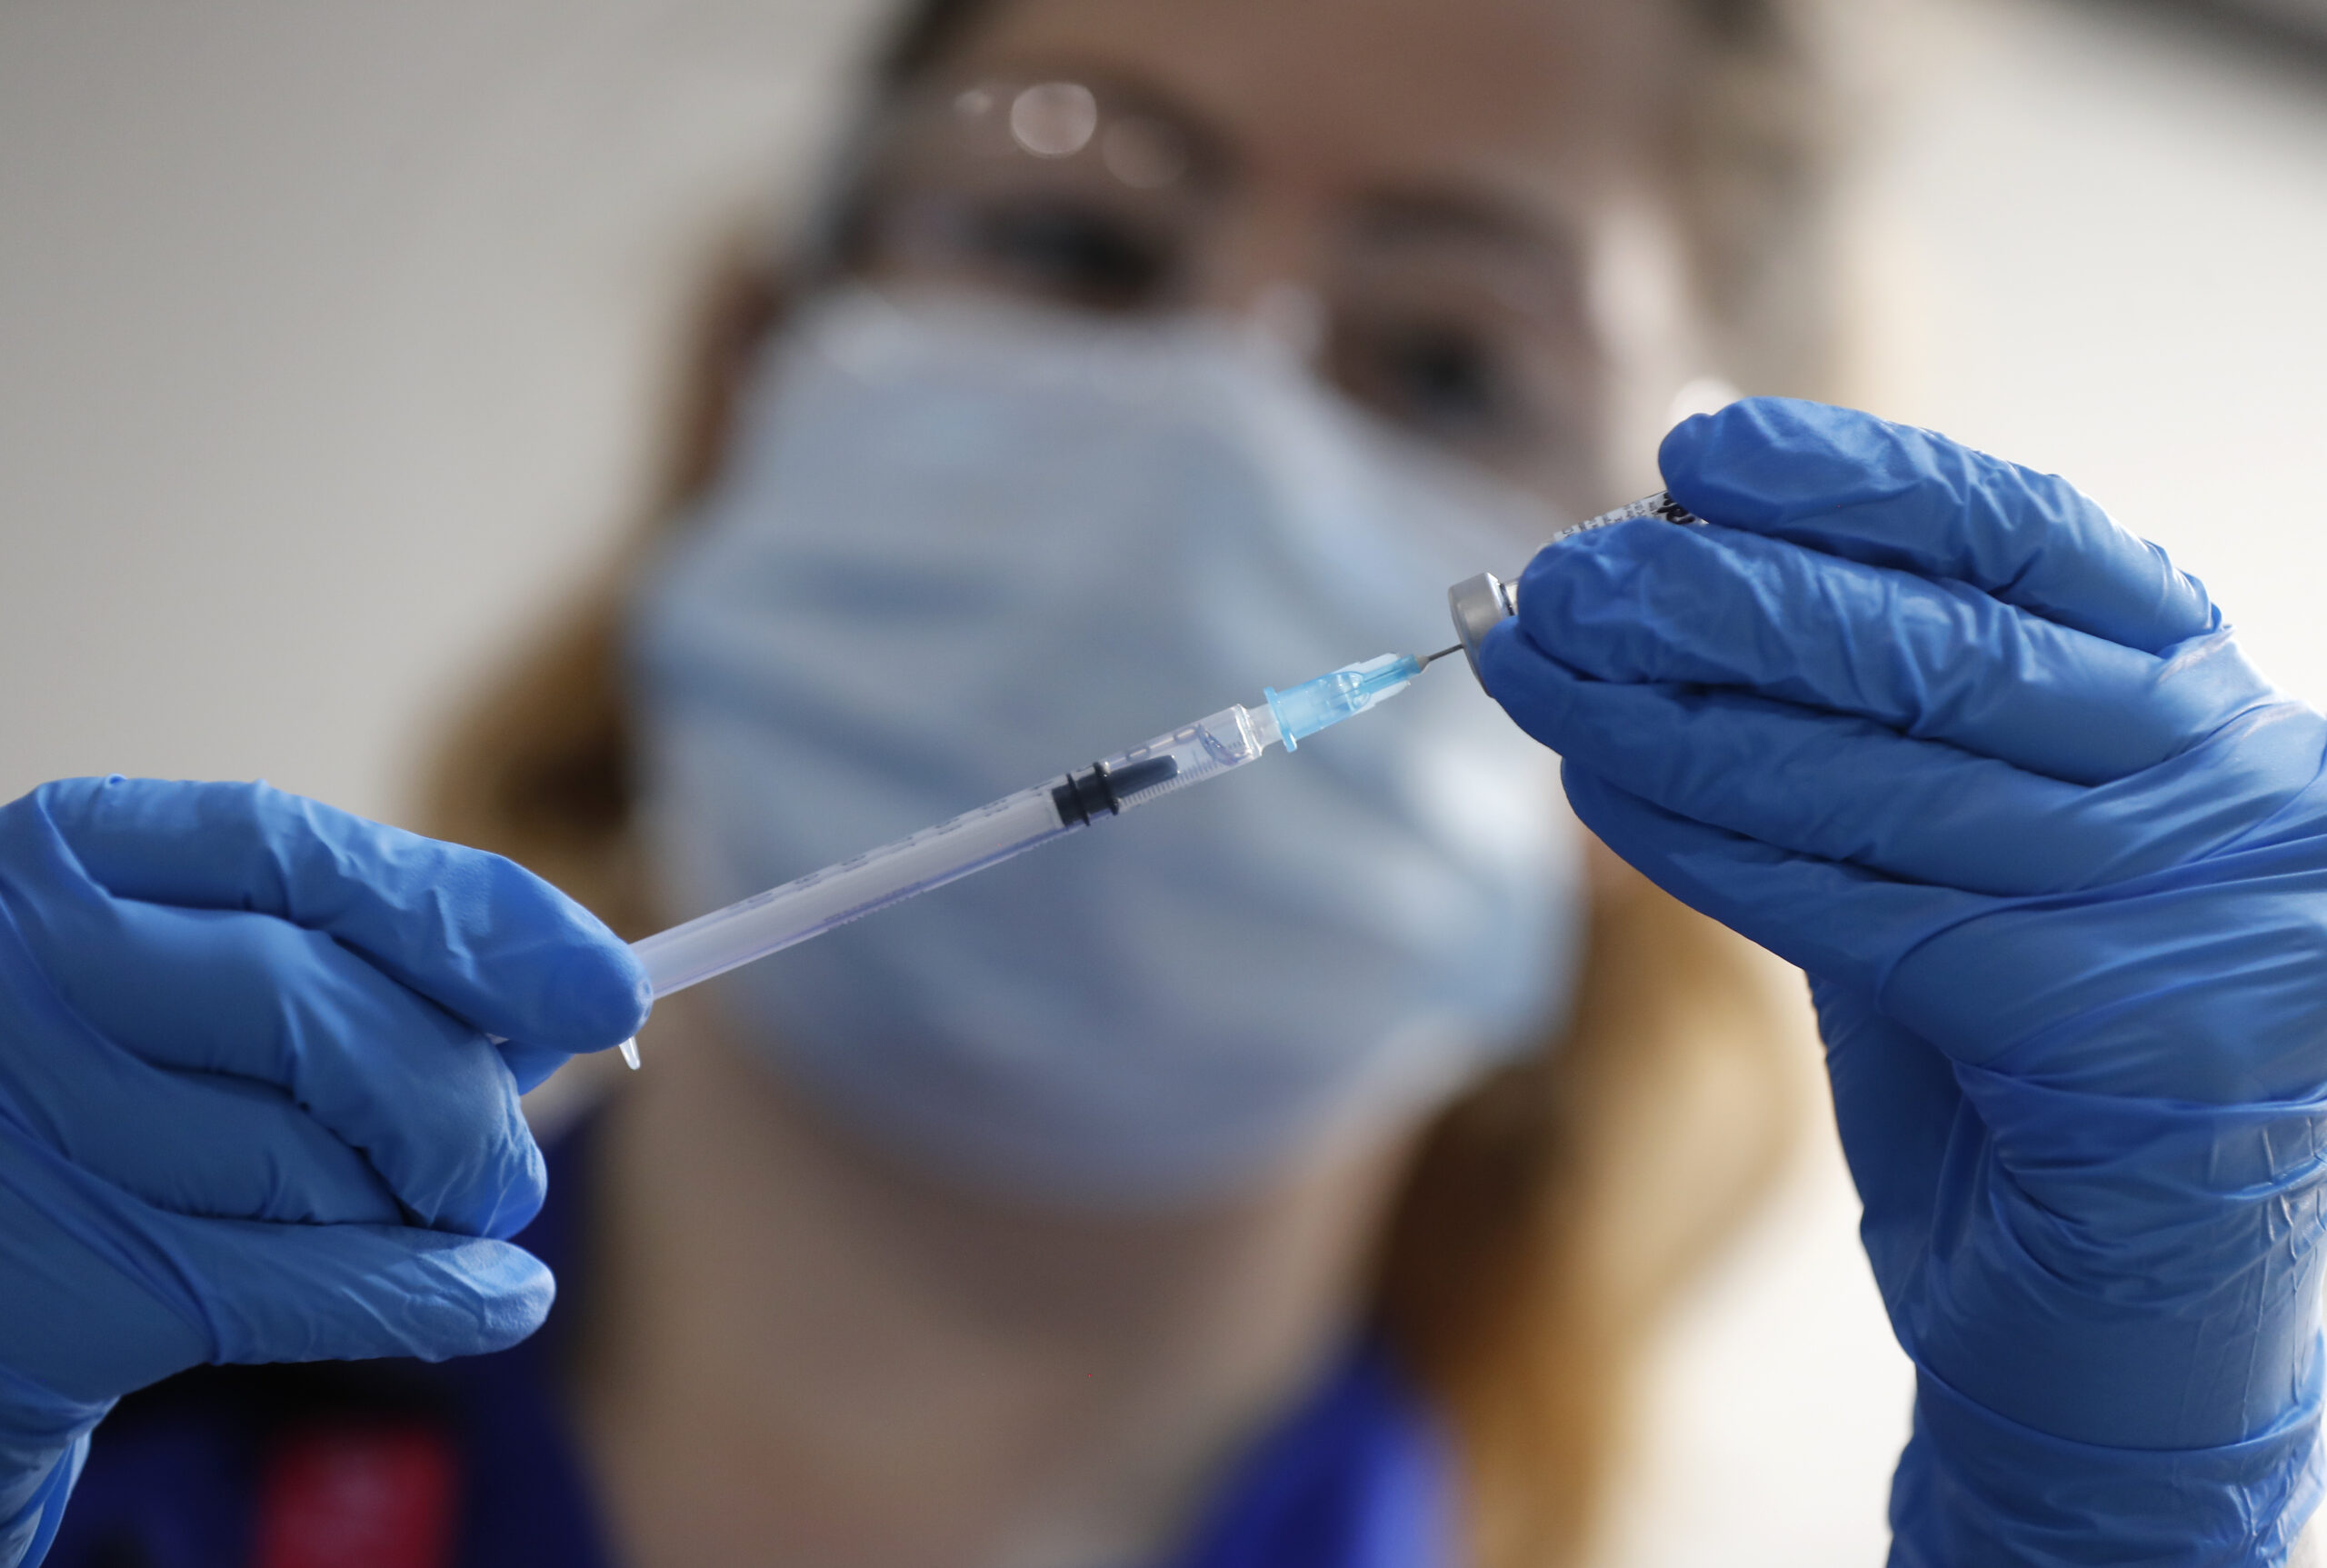 A nurse prepares a shot of the Pfizer-BioNTech COVID-19 vaccine at Guy's Hospital in London, Tuesday, Dec. 8, 2020, as the U.K. health authorities rolled out a national mass vaccination program. U.K. regulators said Wednesday Dec. 9, 2020, that people who have a “significant history’’ of allergic reactions shouldn’t receive the new Pfizer/BioNTech vaccine while they investigate two adverse reactions that occurred on the first day of the country’s mass vaccination program. (AP Photo/Frank Augstein, Pool)